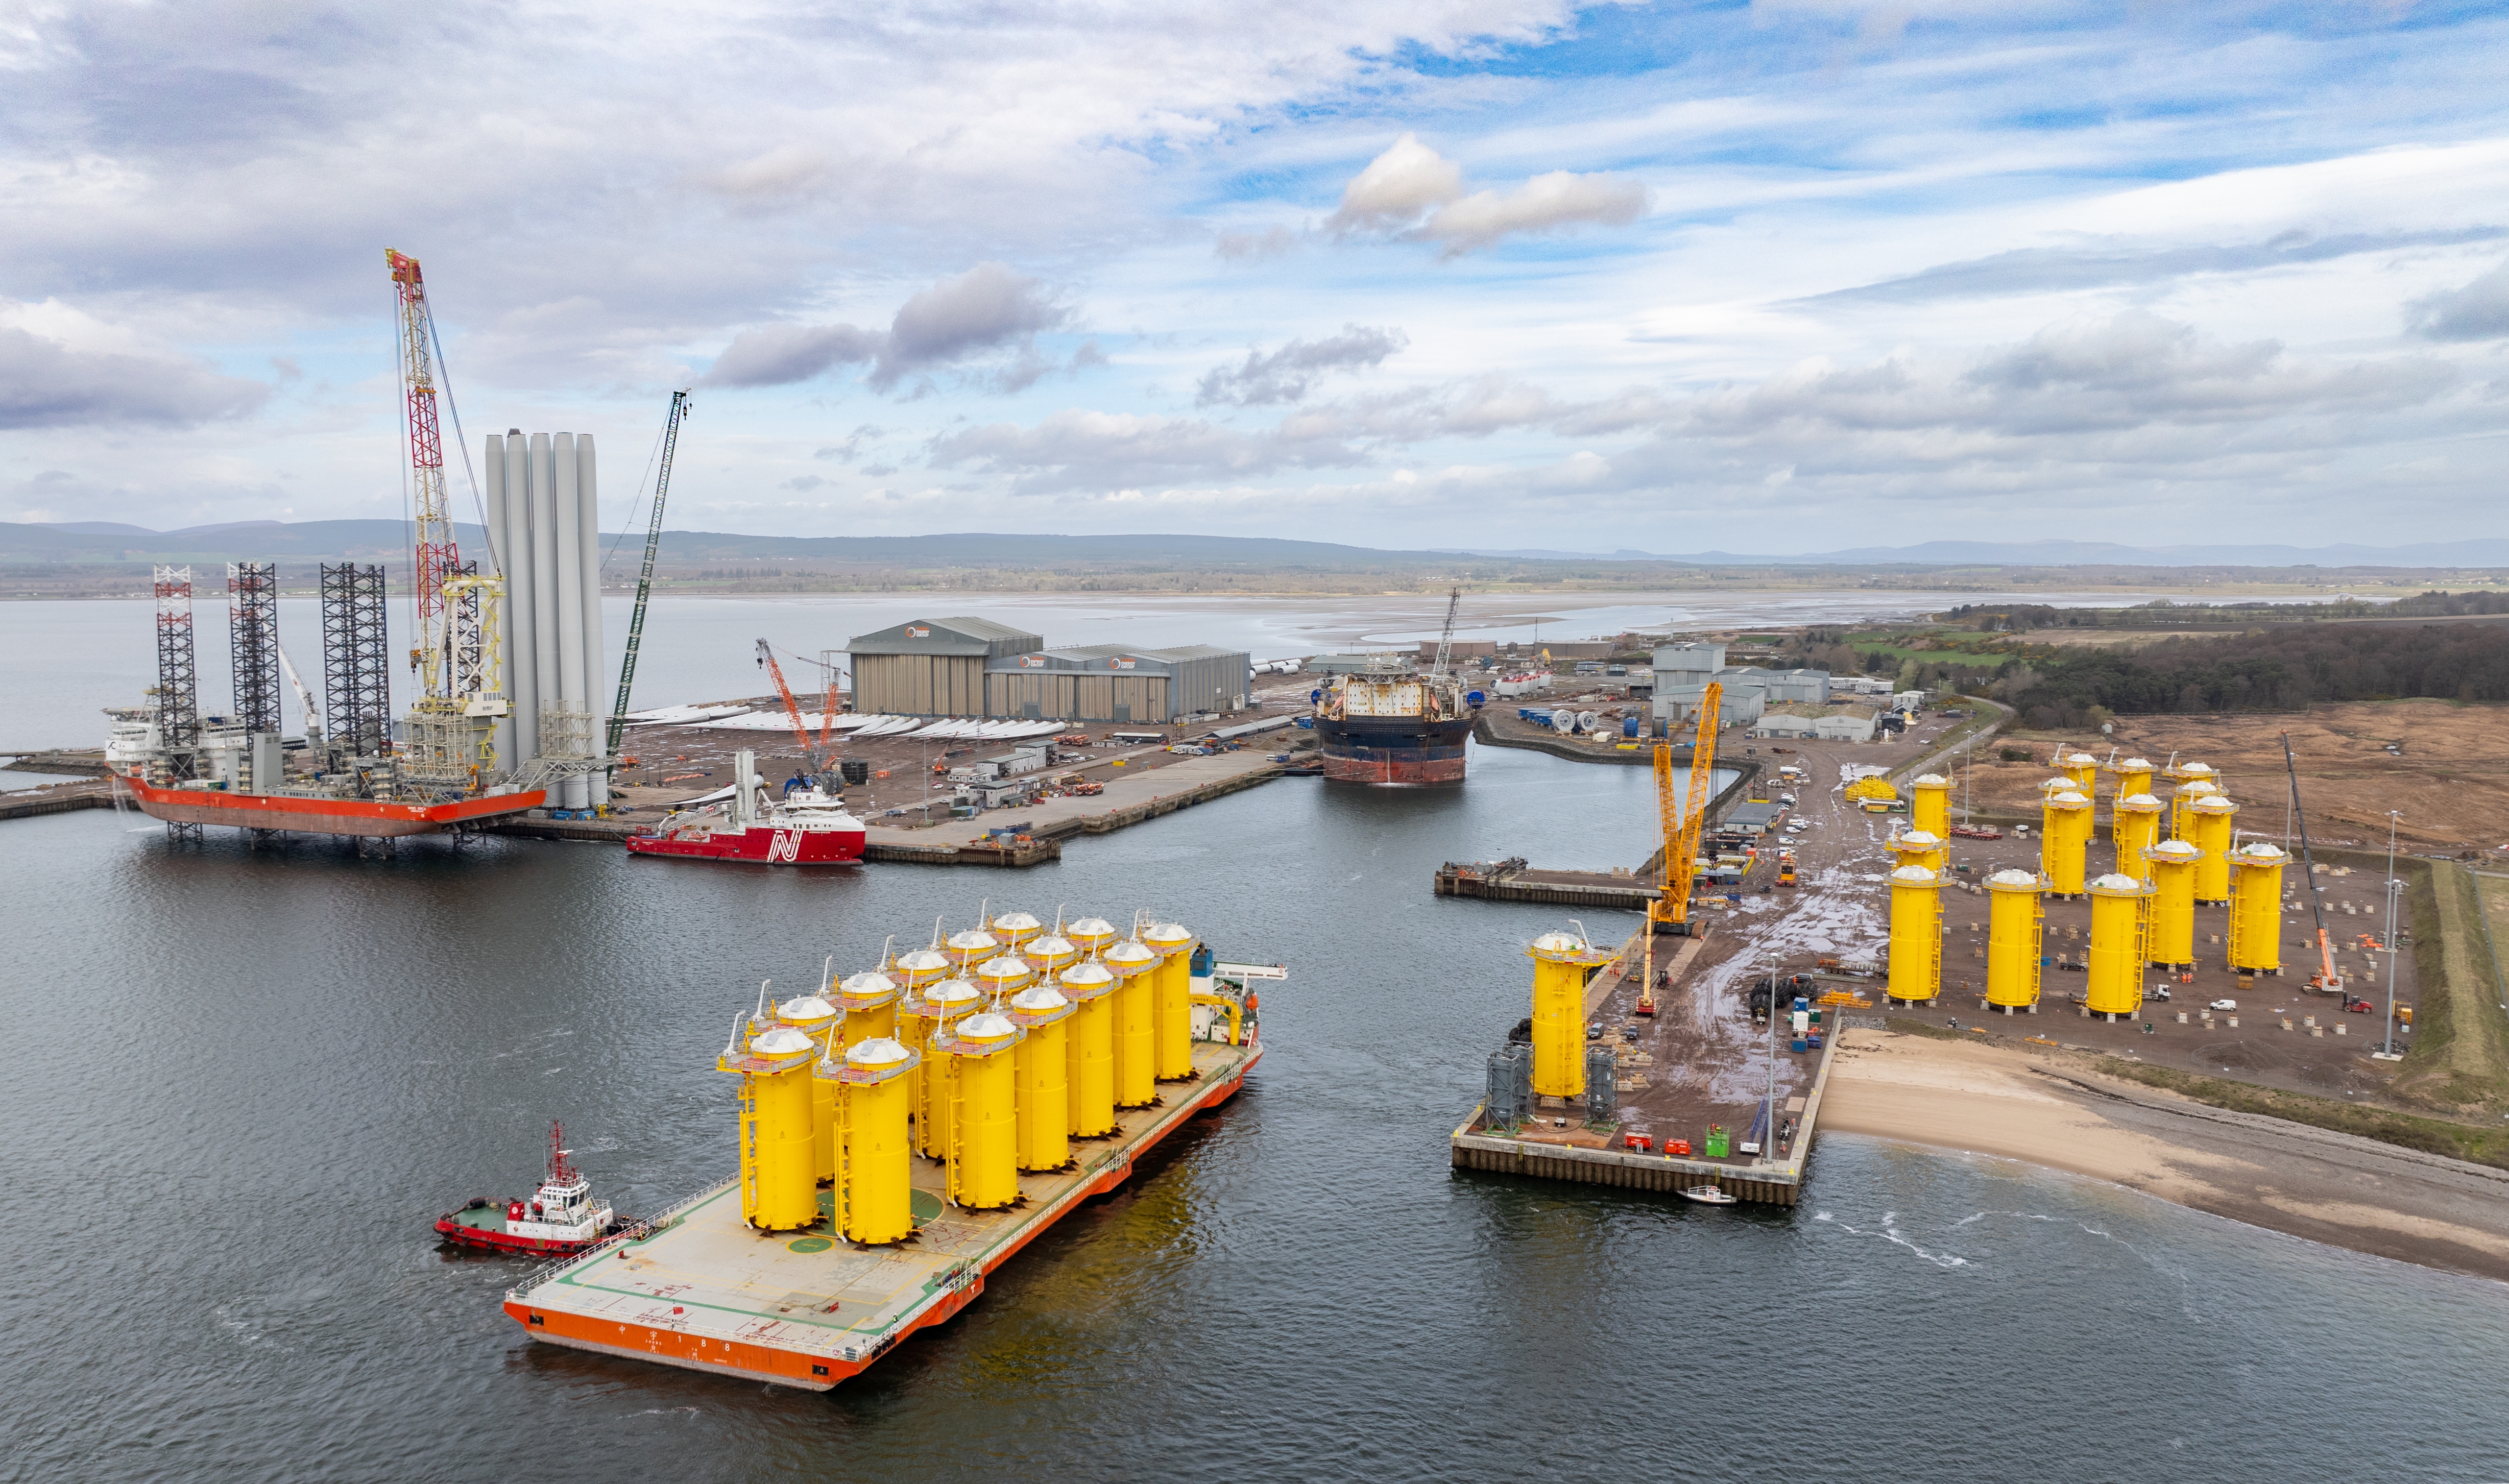 Moray West Offshore Wind Farm at the Port of Nigg